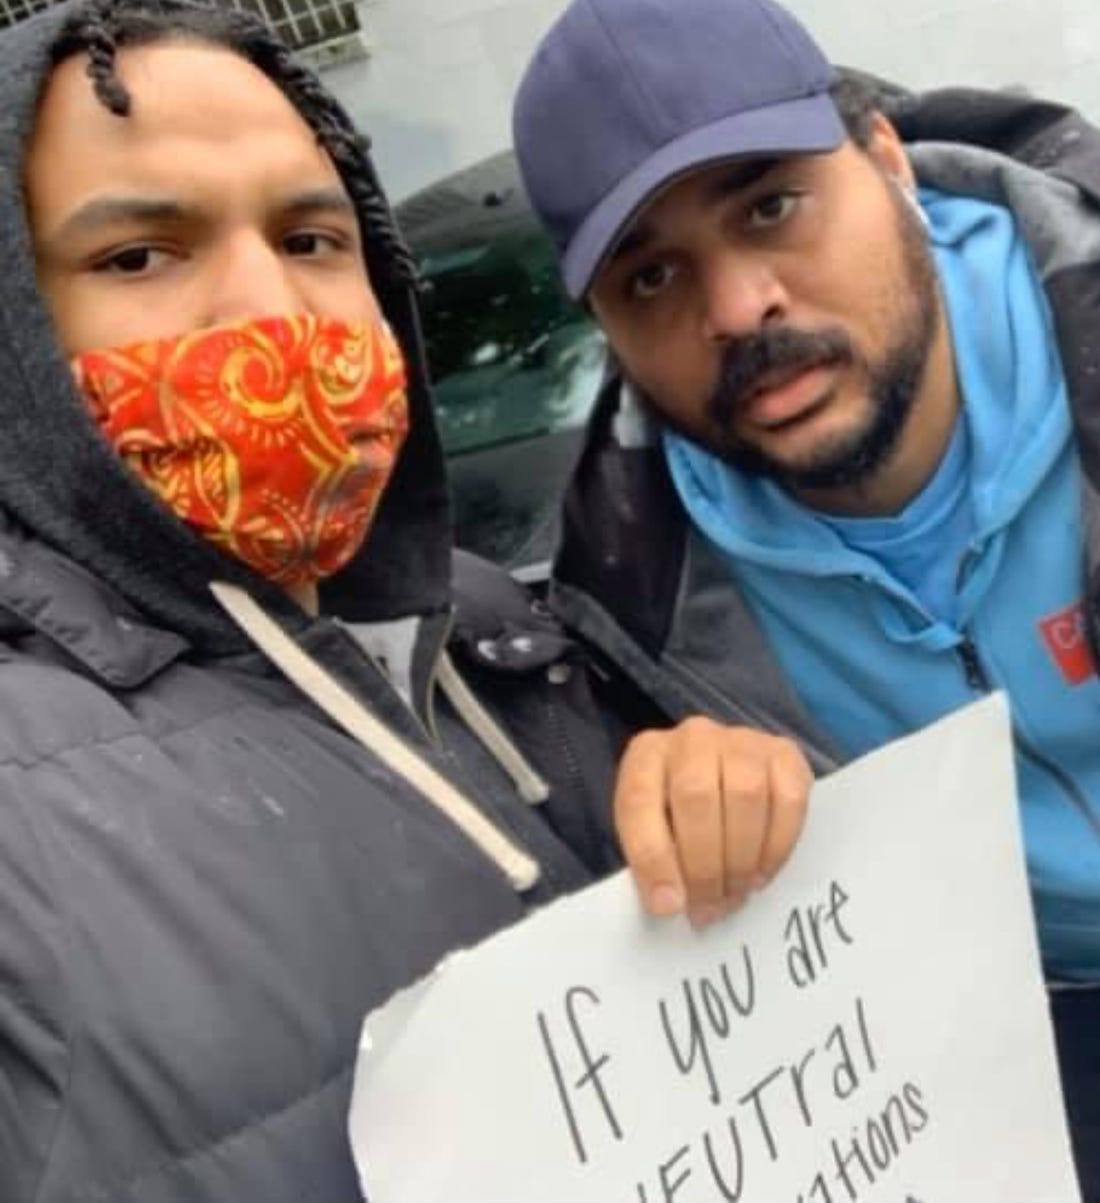 Elijah Lewis with his brother, Mario Dunham. The Seattle activist promoted nonviolence and worked to build the Black community. He was shot and killed in April 2023.